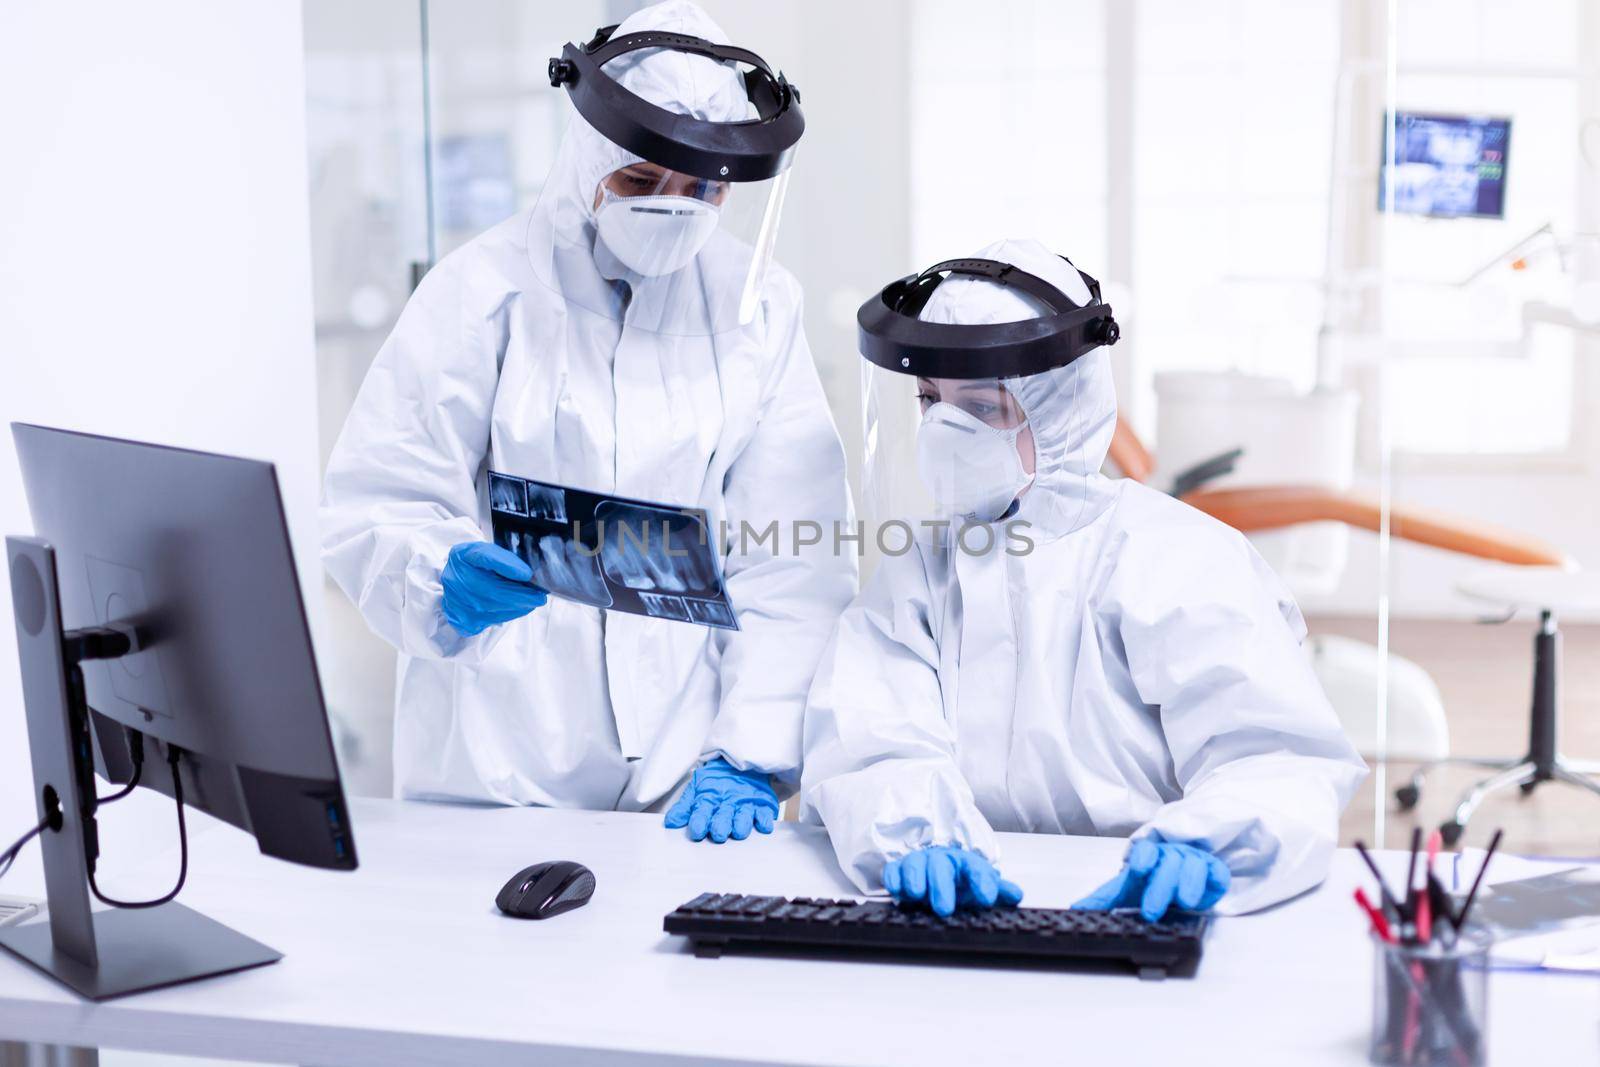 Dentist doctor and nurse in ppe suit against covid-19 and nurse holding teeth x-ray. Medical specialist wearing protective gear against coronavirus during global outbreak looking at radiography in dental office.